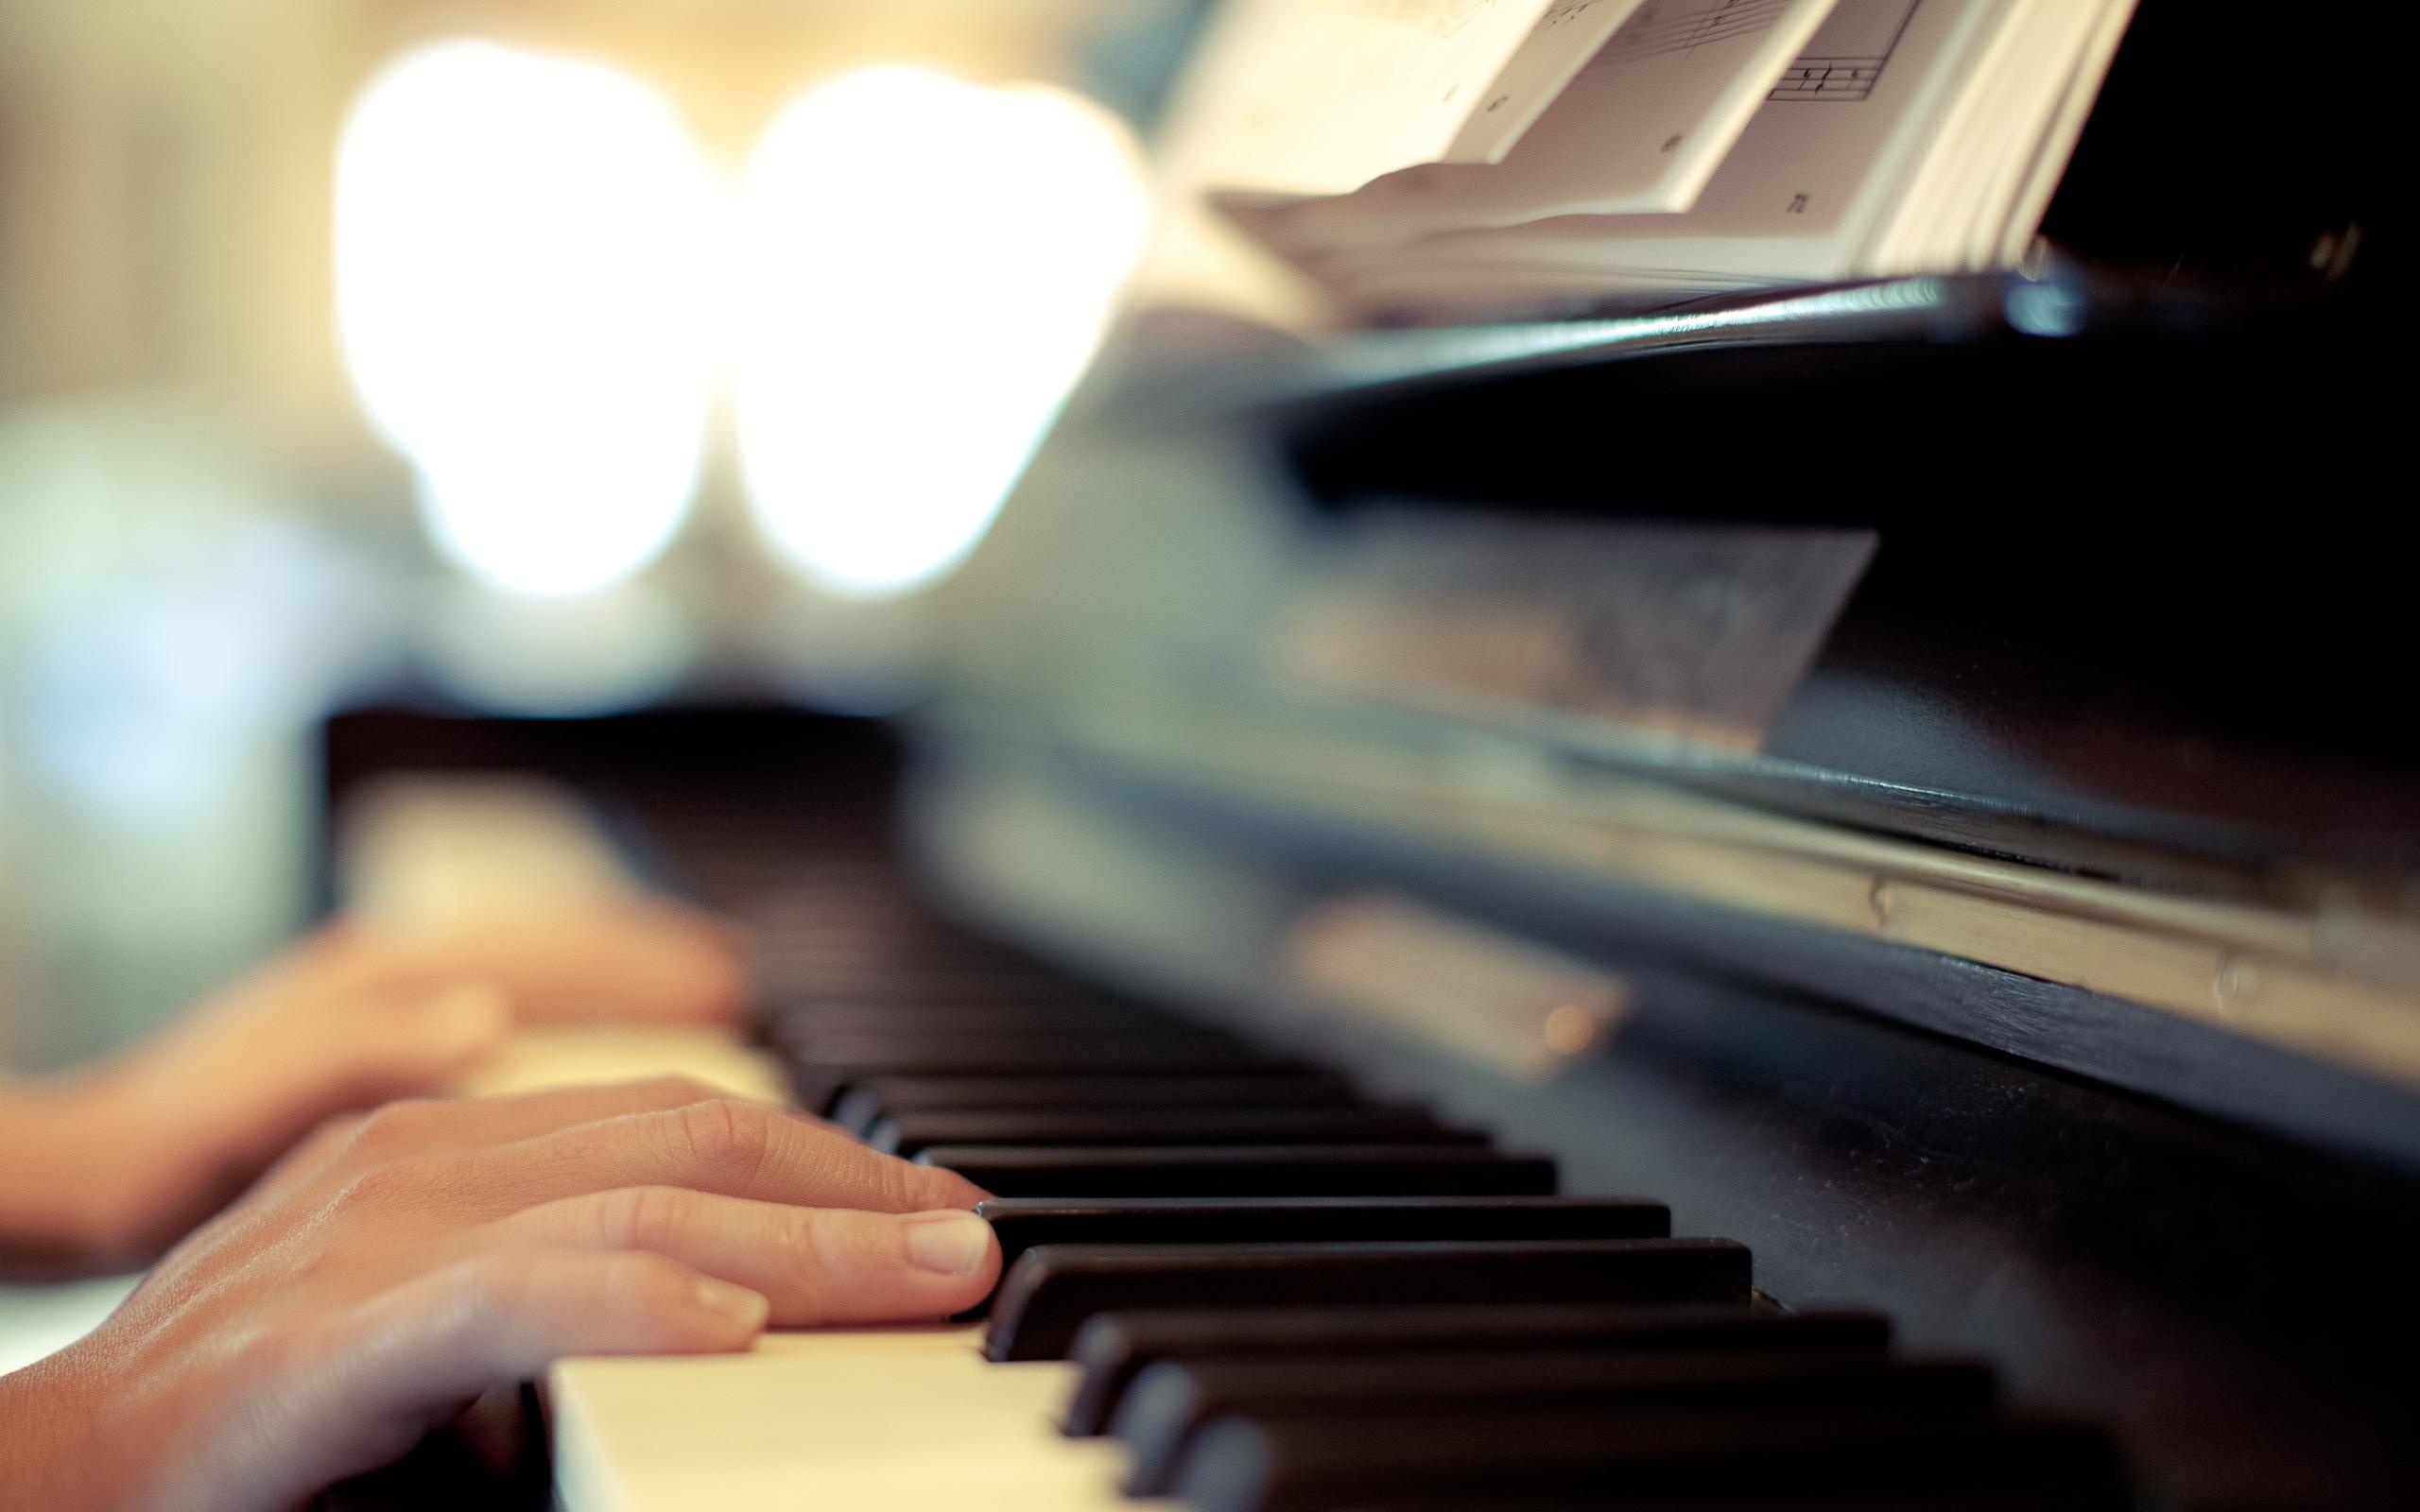 Piano: Playing Piano, Bicolored Keyboard, The Player’s Hands. 2560x1600 HD Wallpaper.